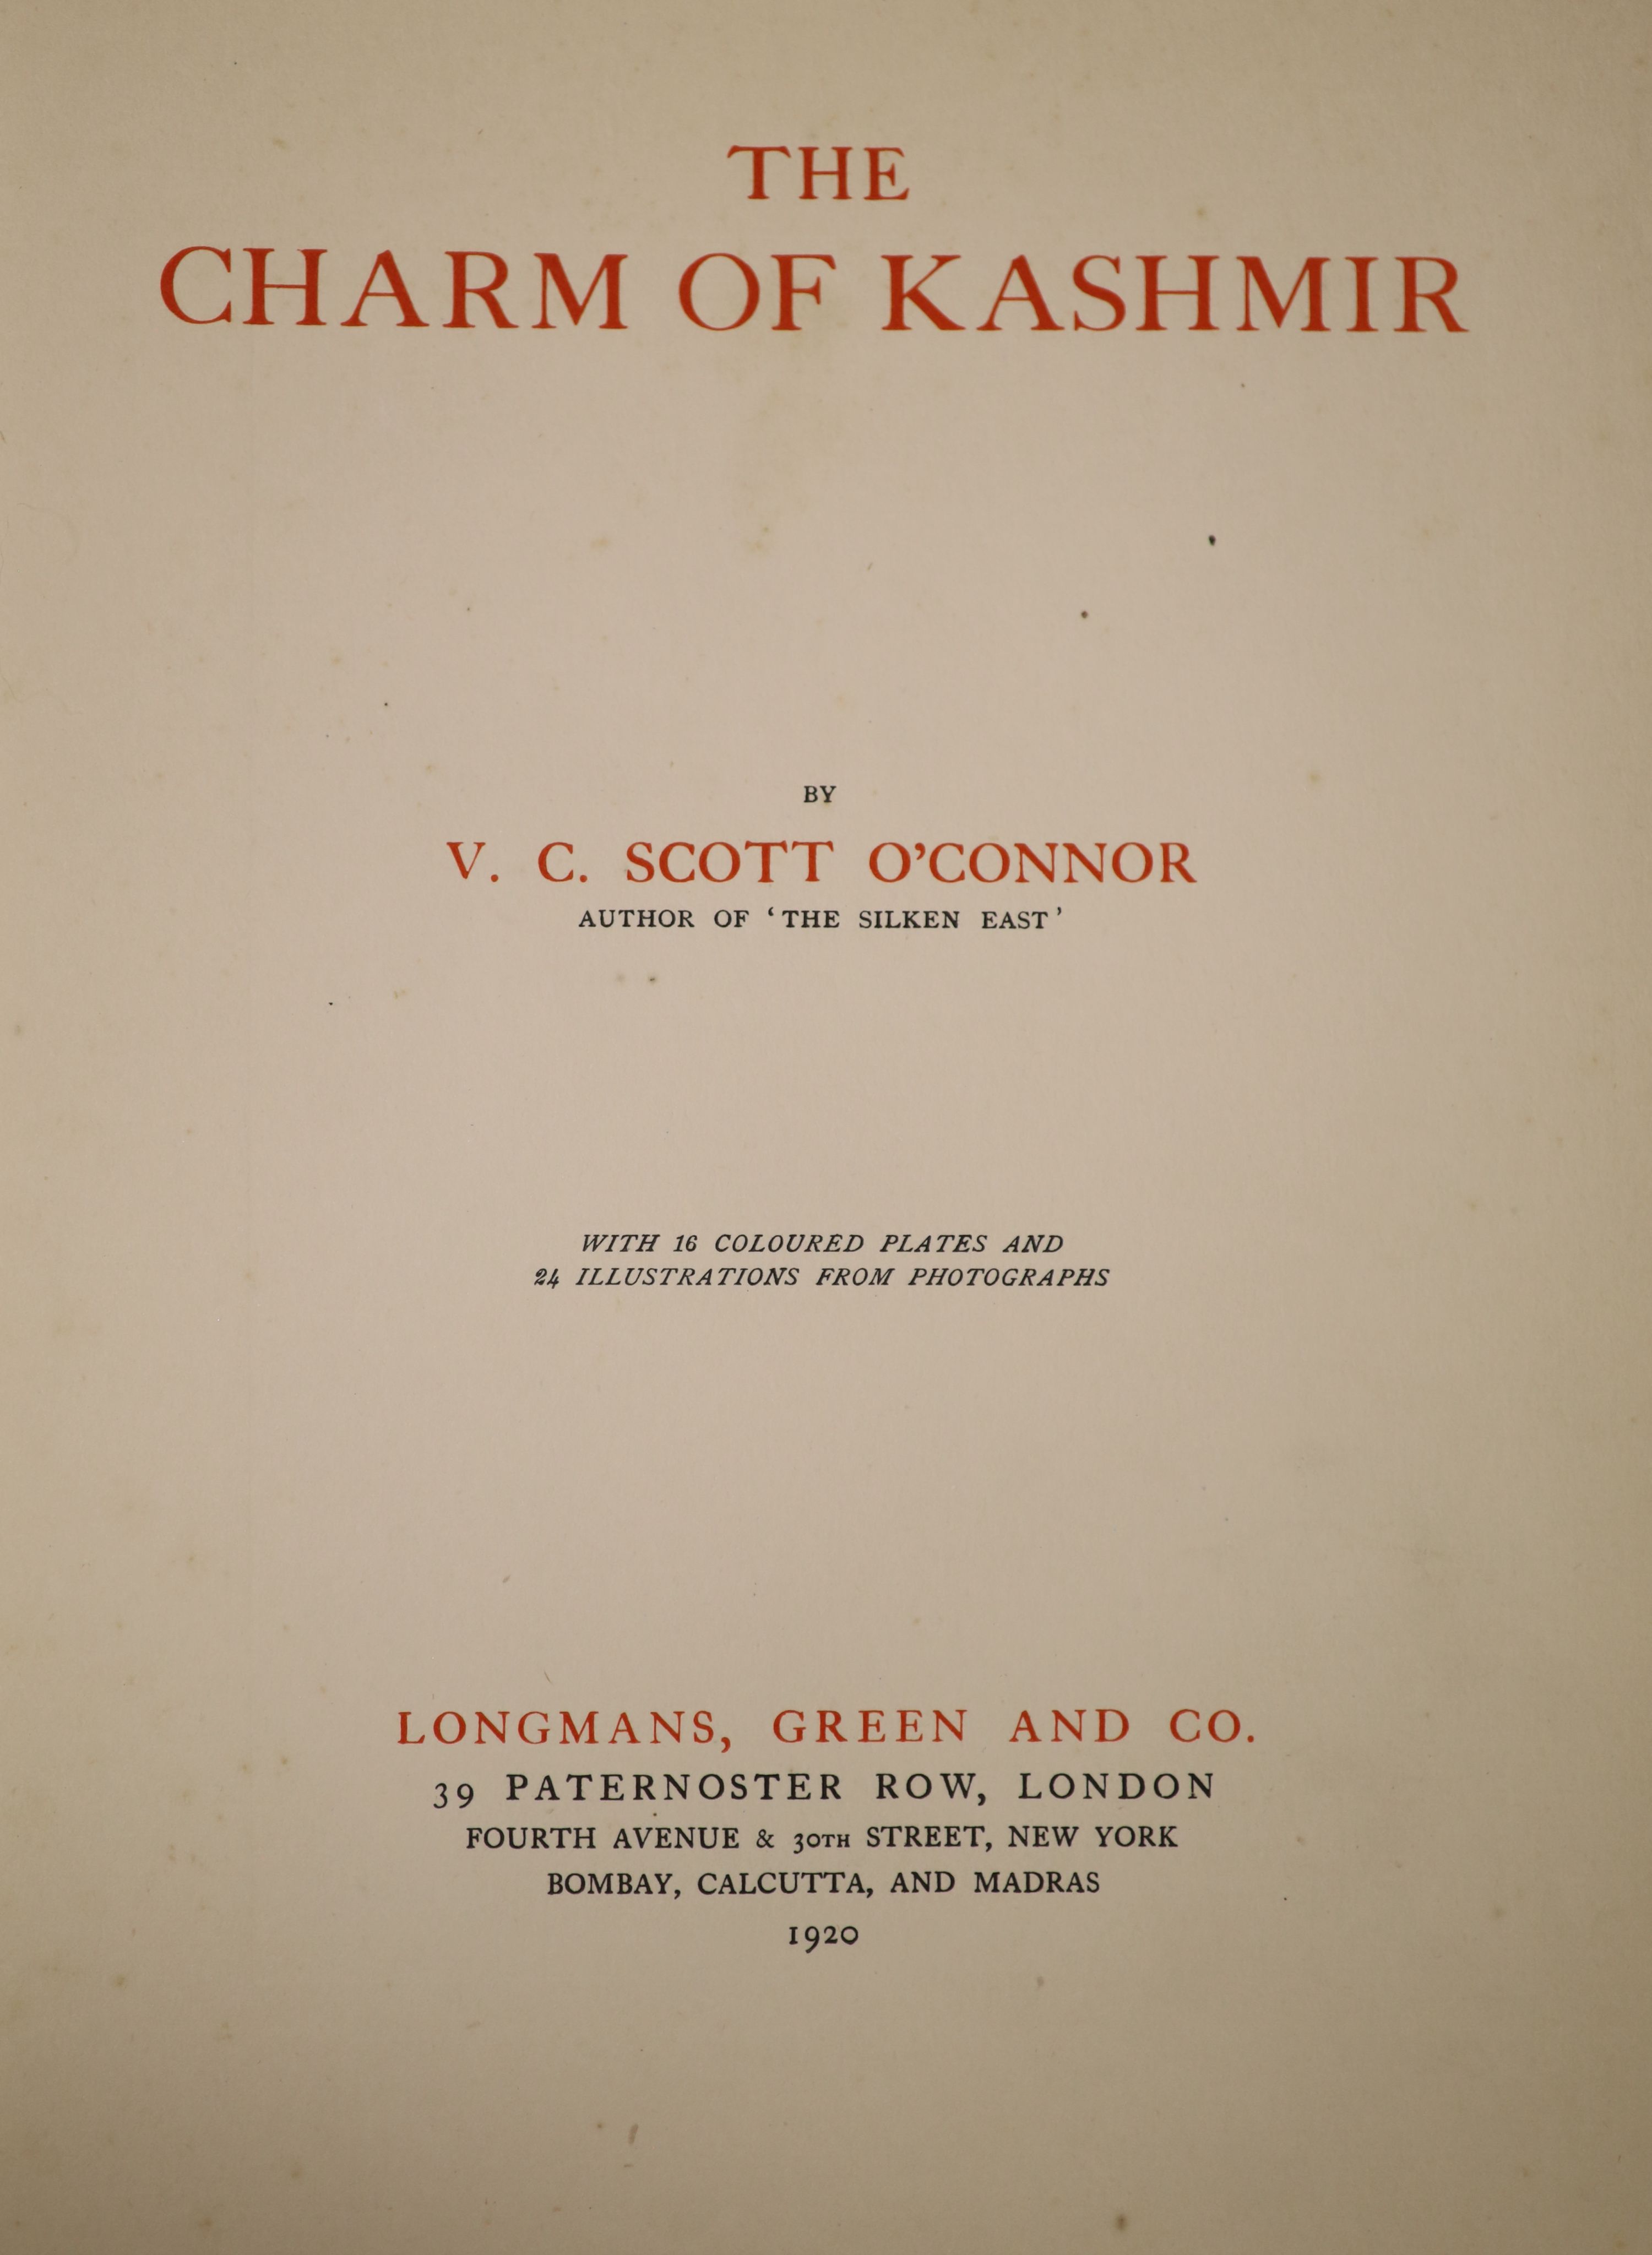 O’Connor, Vincent, Clarence, Scott - The Charm of Kashmir, first edition, qto, cream buckram gilt, with 16 tipped-in colour plates, Longmans, Green and Co., London, 1920